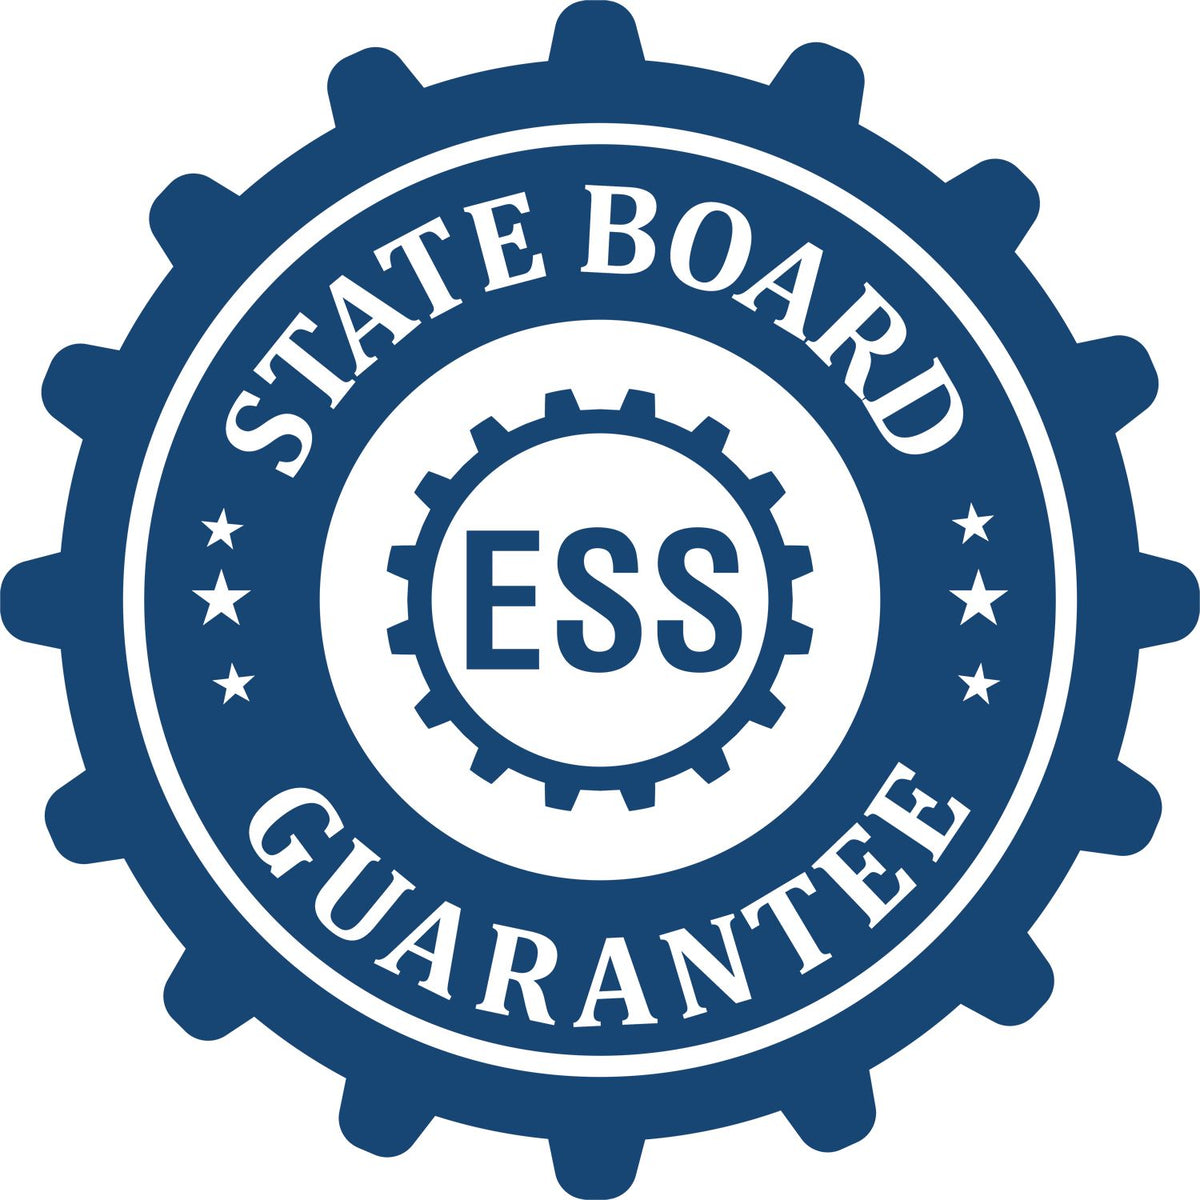 An emblem in a gear shape illustrating a state board guarantee for the Heavy Duty Cast Iron Guam Engineer Seal Embosser product.